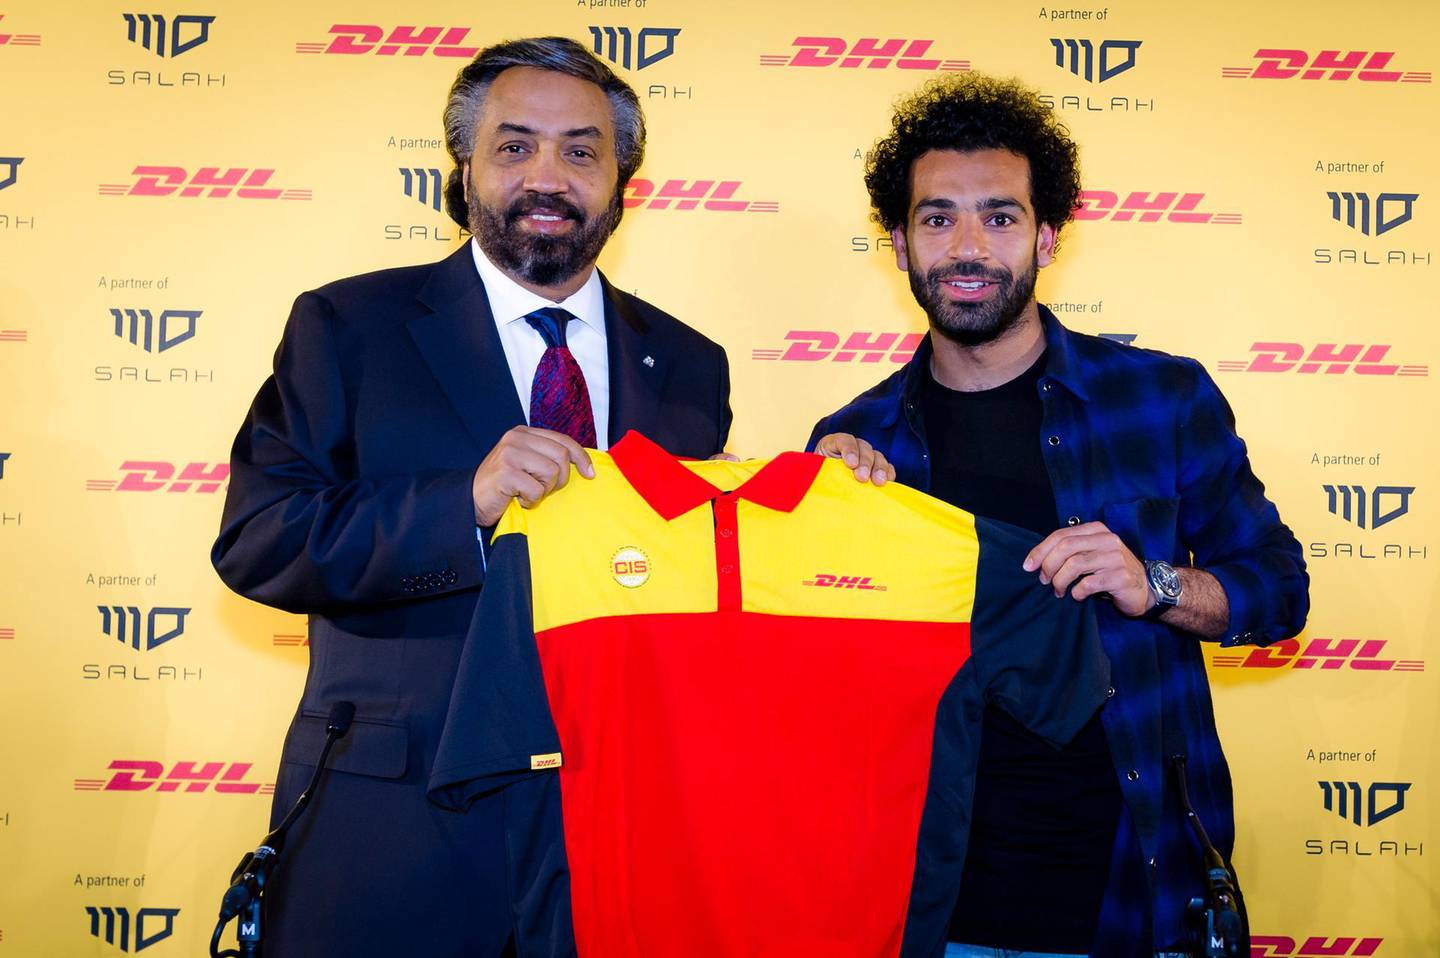 Liverpool and Egypt forward Mohamed Salah, right, and Nour Suliman, chief executive of DHL in the Middle East and North Africa. Courtesy DHL